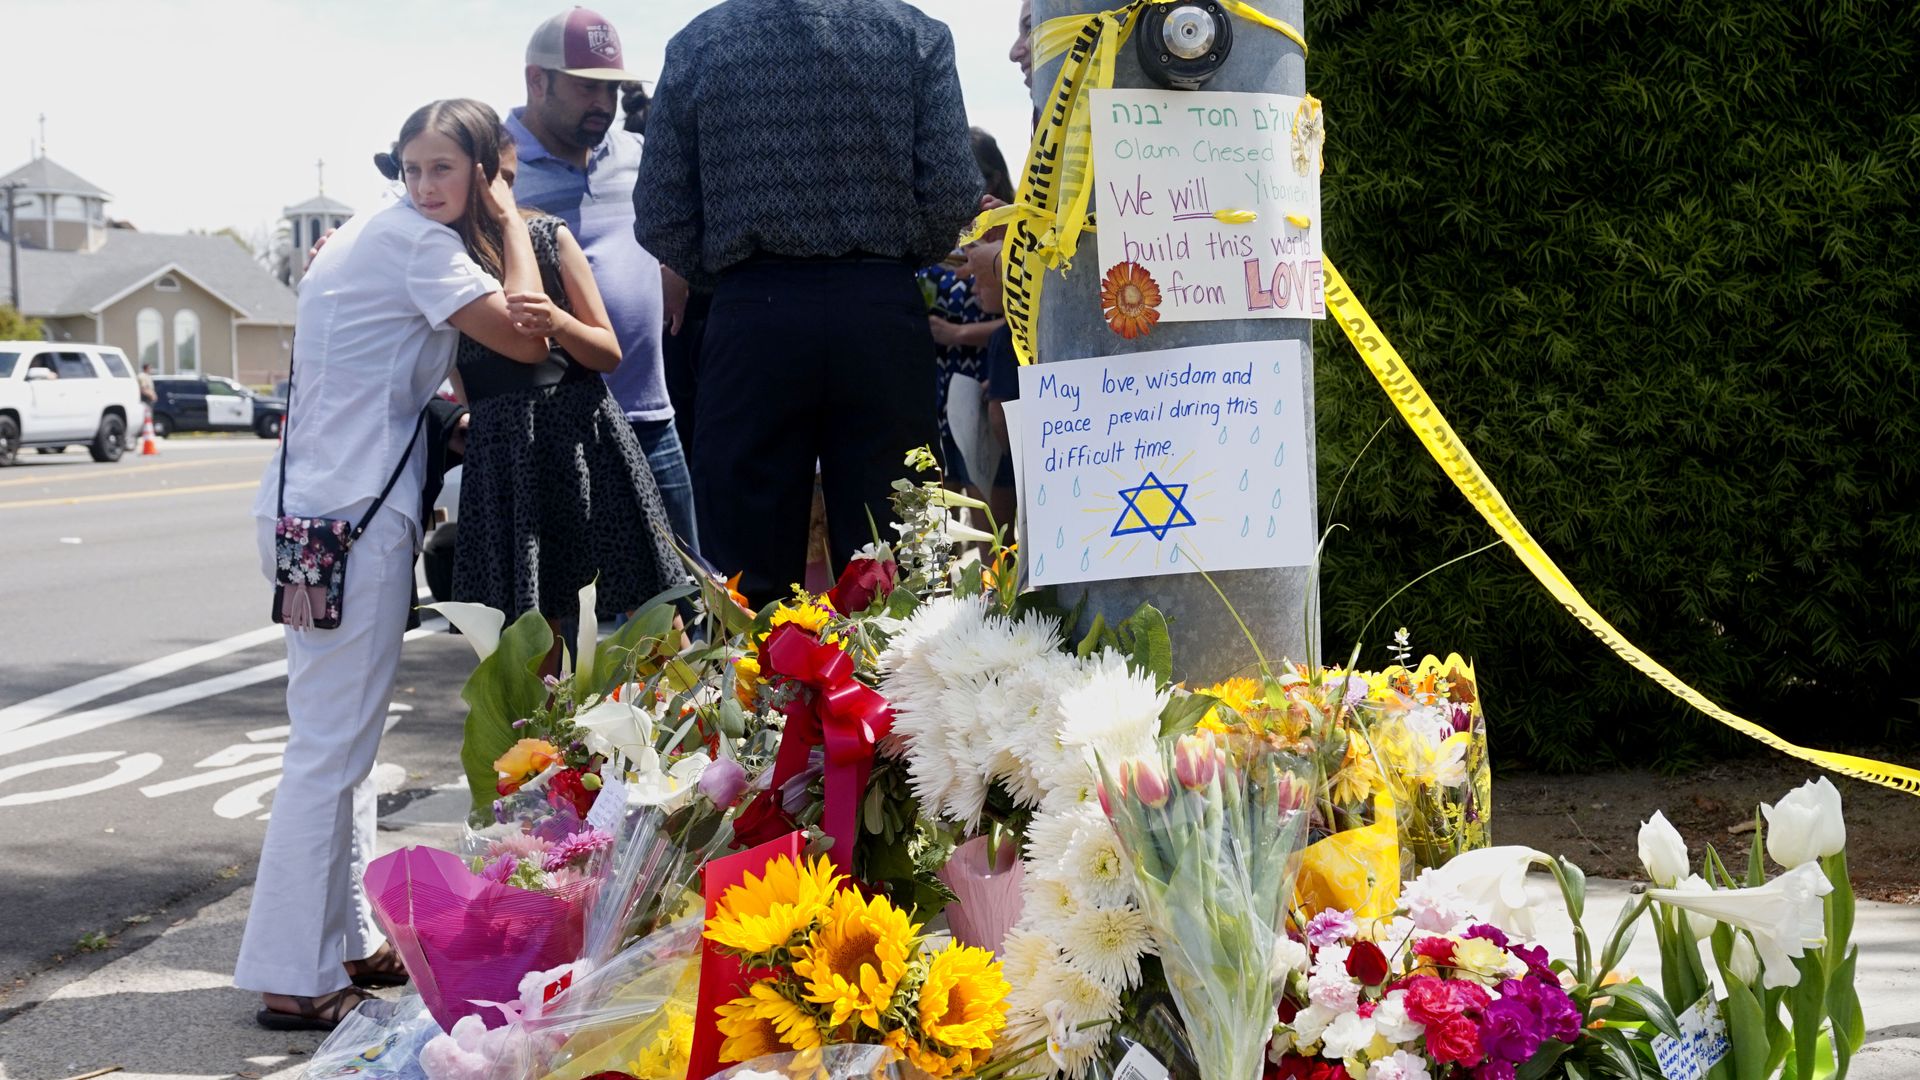 A make-shift memorial across the street from the Chabad of Poway Synagogue on Sunday, April 28, 2019 in Poway, California.